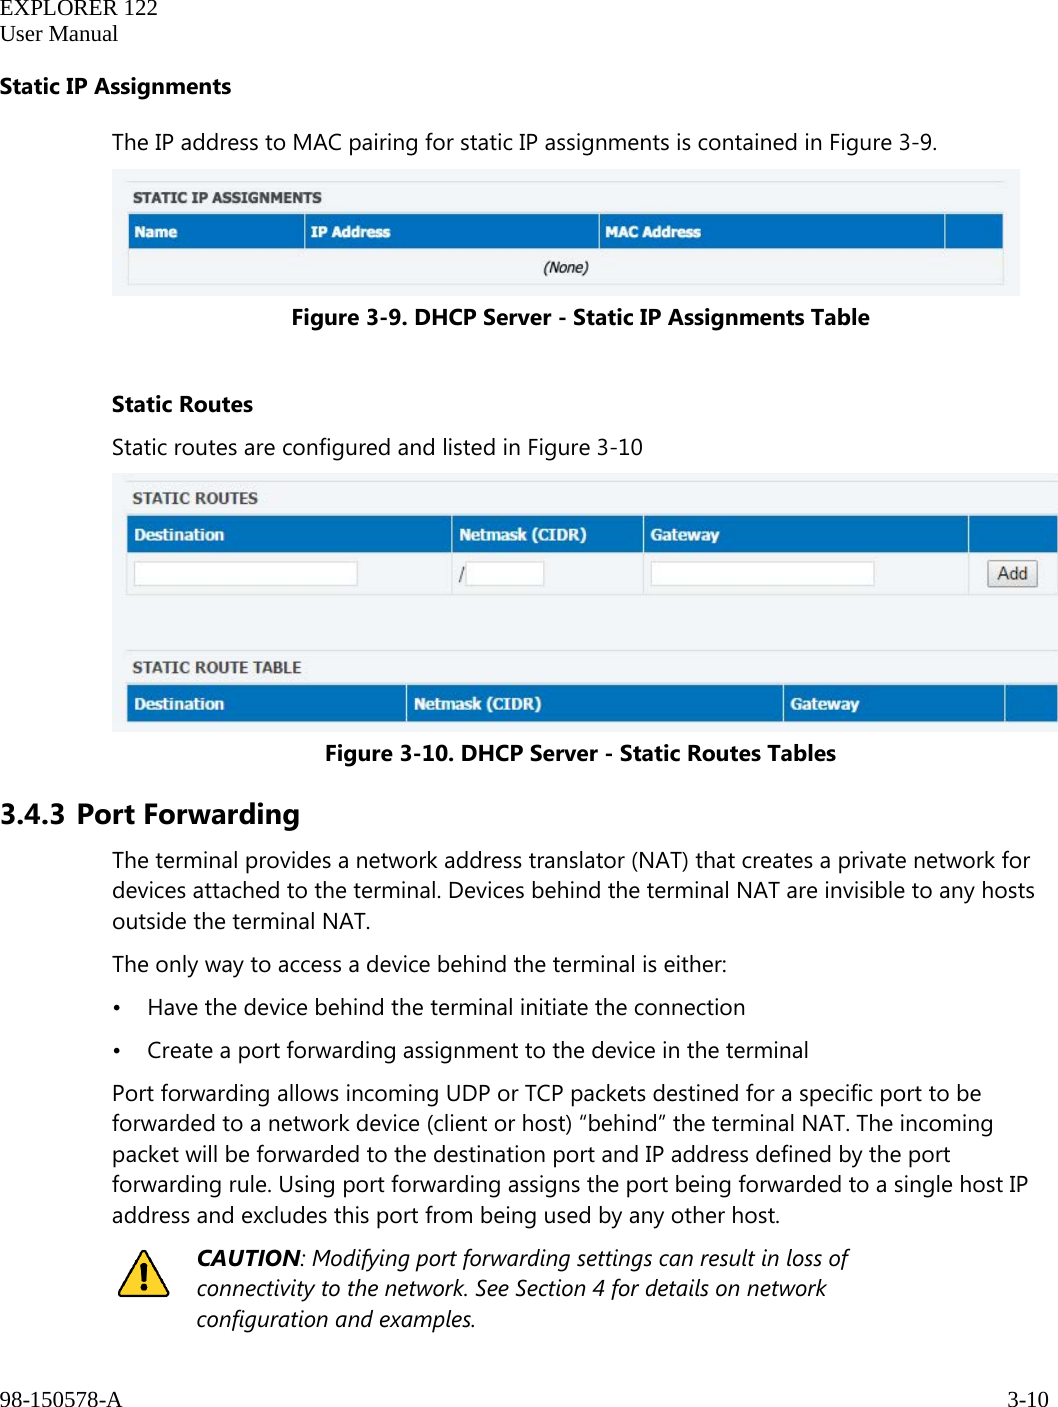   EXPLORER 122  User Manual  98-150578-A     3-10   Static IP Assignments The IP address to MAC pairing for static IP assignments is contained in Figure 3-9.  Figure 3-9. DHCP Server - Static IP Assignments Table  Static Routes Static routes are configured and listed in Figure 3-10  Figure 3-10. DHCP Server - Static Routes Tables 3.4.3 Port Forwarding The terminal provides a network address translator (NAT) that creates a private network for devices attached to the terminal. Devices behind the terminal NAT are invisible to any hosts outside the terminal NAT.  The only way to access a device behind the terminal is either: • Have the device behind the terminal initiate the connection • Create a port forwarding assignment to the device in the terminal Port forwarding allows incoming UDP or TCP packets destined for a specific port to be forwarded to a network device (client or host) “behind” the terminal NAT. The incoming packet will be forwarded to the destination port and IP address defined by the port forwarding rule. Using port forwarding assigns the port being forwarded to a single host IP address and excludes this port from being used by any other host.   CAUTION: Modifying port forwarding settings can result in loss of connectivity to the network. See Section 4 for details on network configuration and examples. 